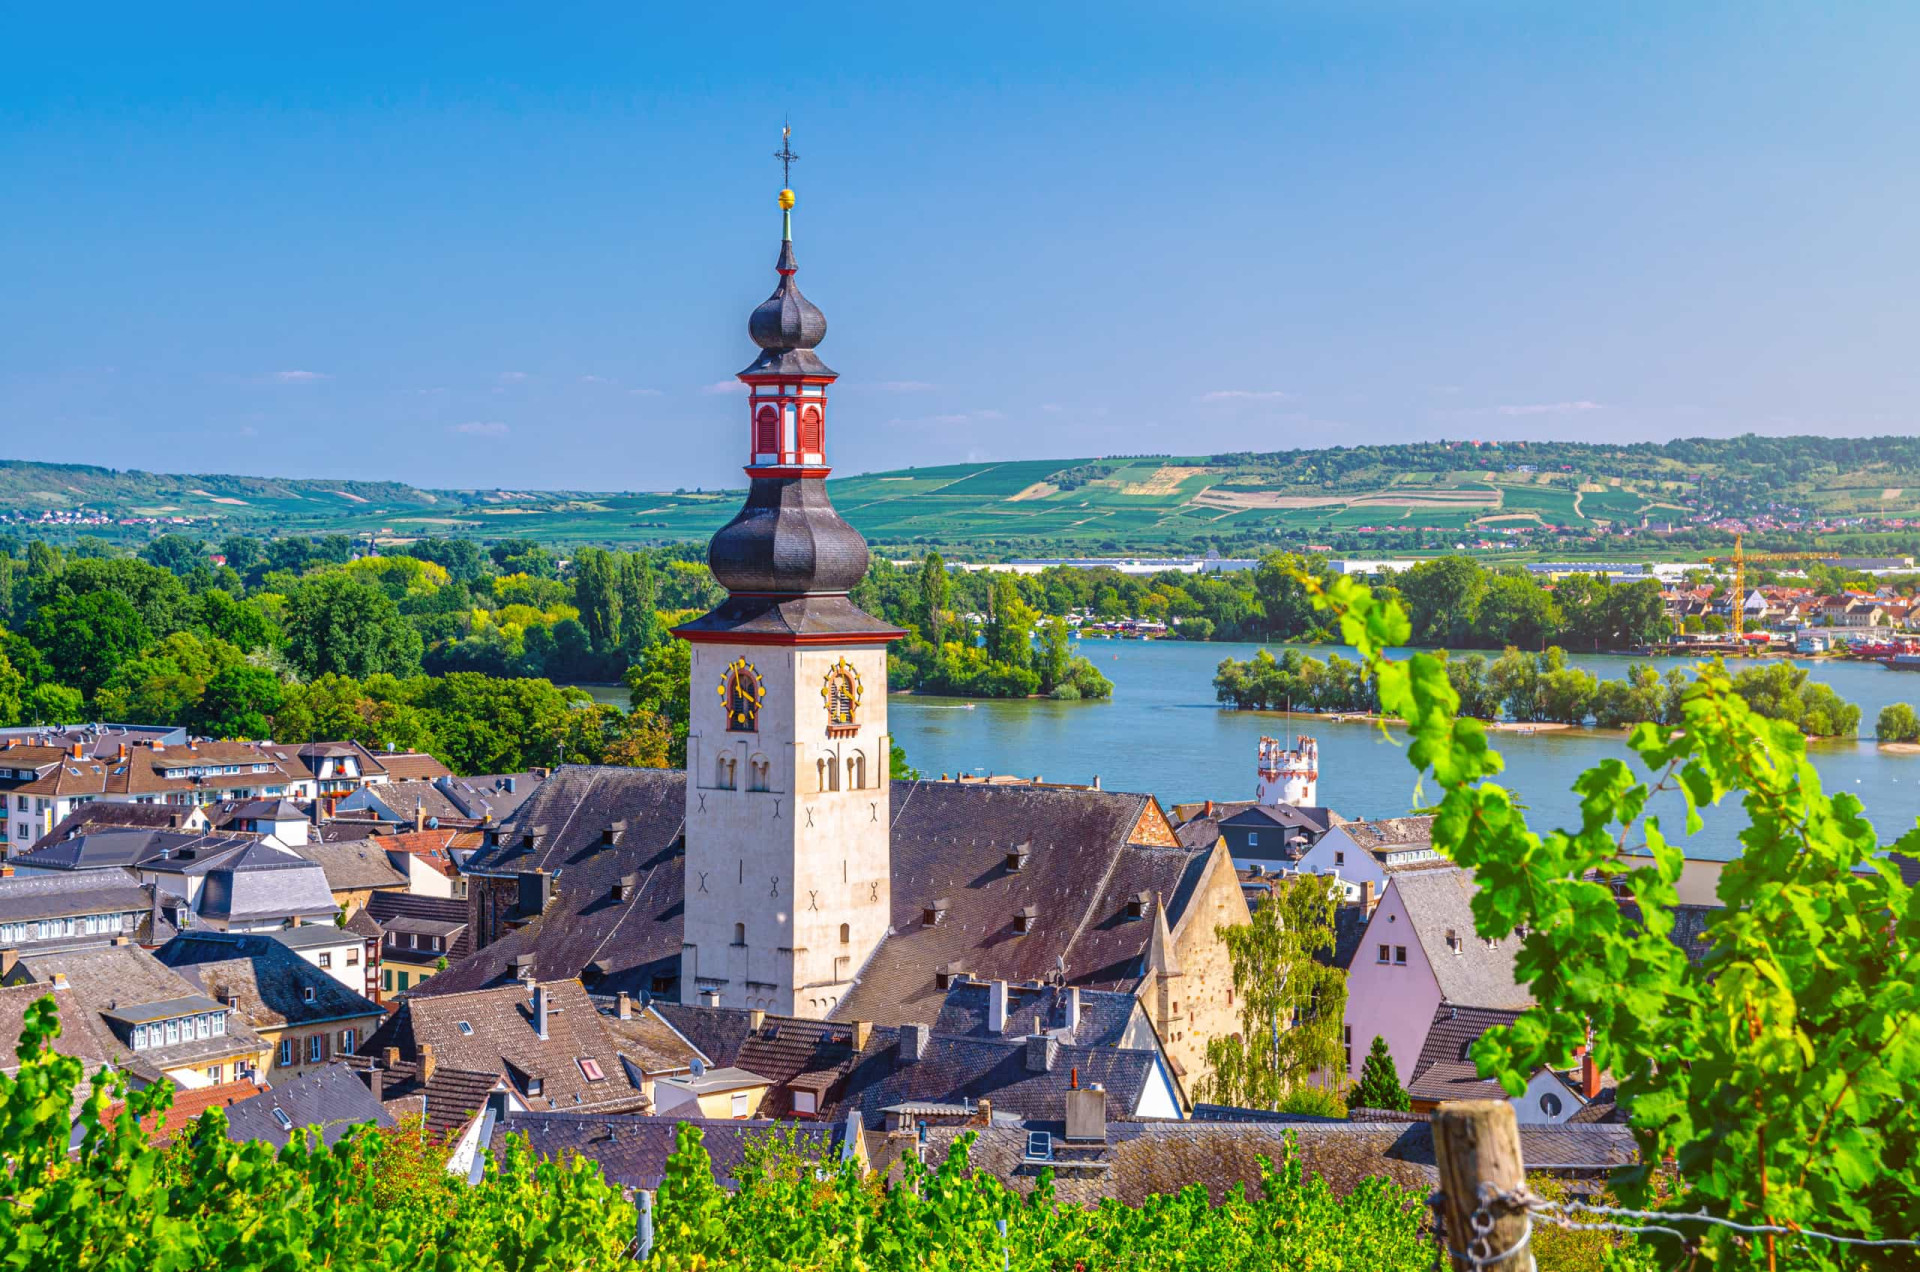 <p>The lovely Upper Middle Rhine Valley section of the Rhine Gorge is a UNESCO World Heritage Site recognized for its numerous castles, medieval towns and villages, and the bucolic landscape that distinguishes this picturesque part of Germany.</p><p>You may also like:<a href="https://www.starsinsider.com/n/489501?utm_source=msn.com&utm_medium=display&utm_campaign=referral_description&utm_content=481885v1en-us"> Scandals that the Catholic Church doesn't want you to know about</a></p>